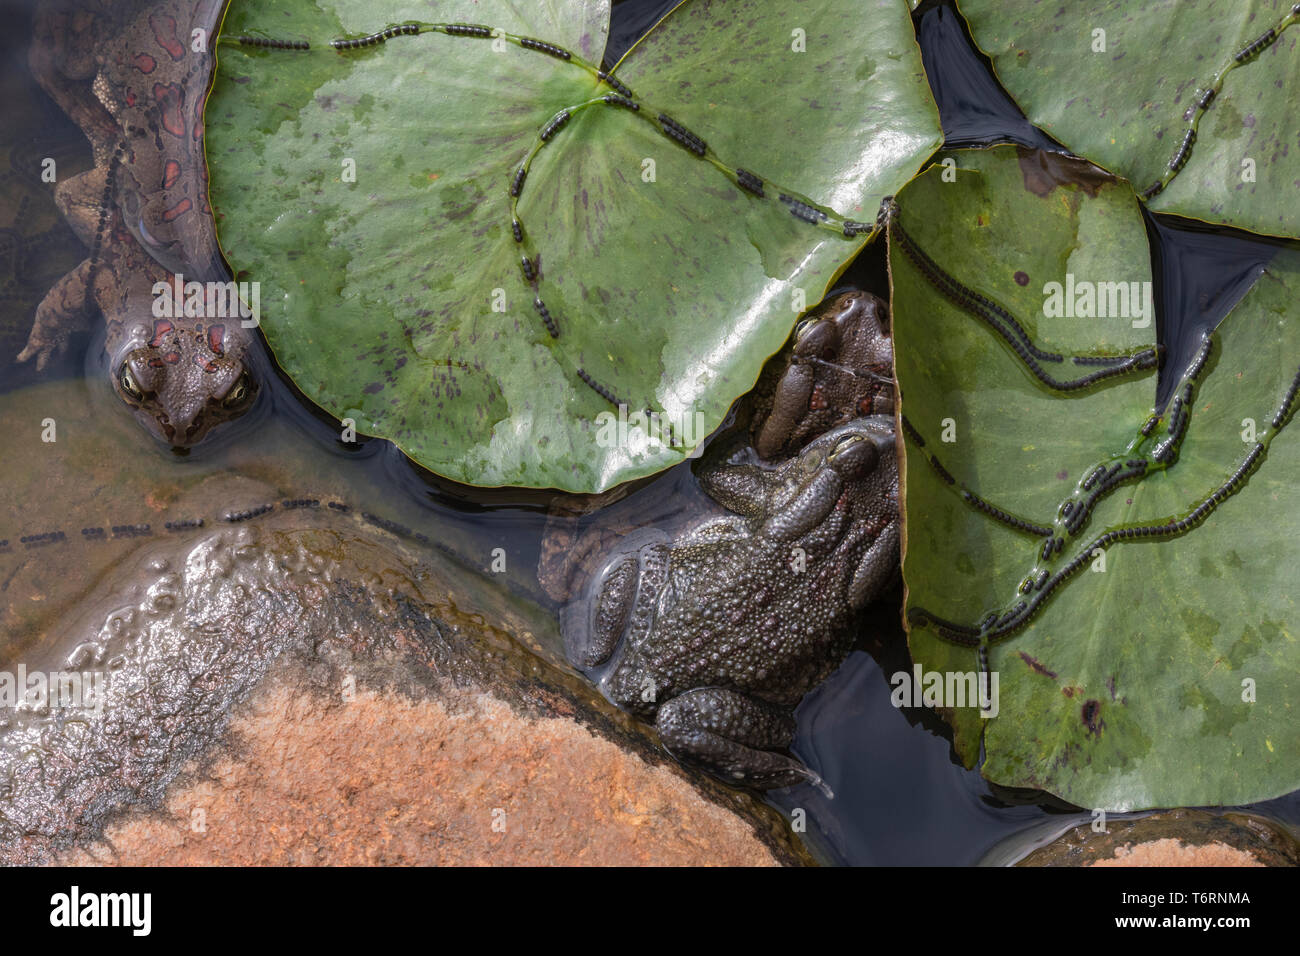 Eastern olive toads (Amietophrynus garmani) mating, with spawn chains, Zimanga private game reserve, KwaZulu-Natal, South Africa, September 2018 Stock Photo